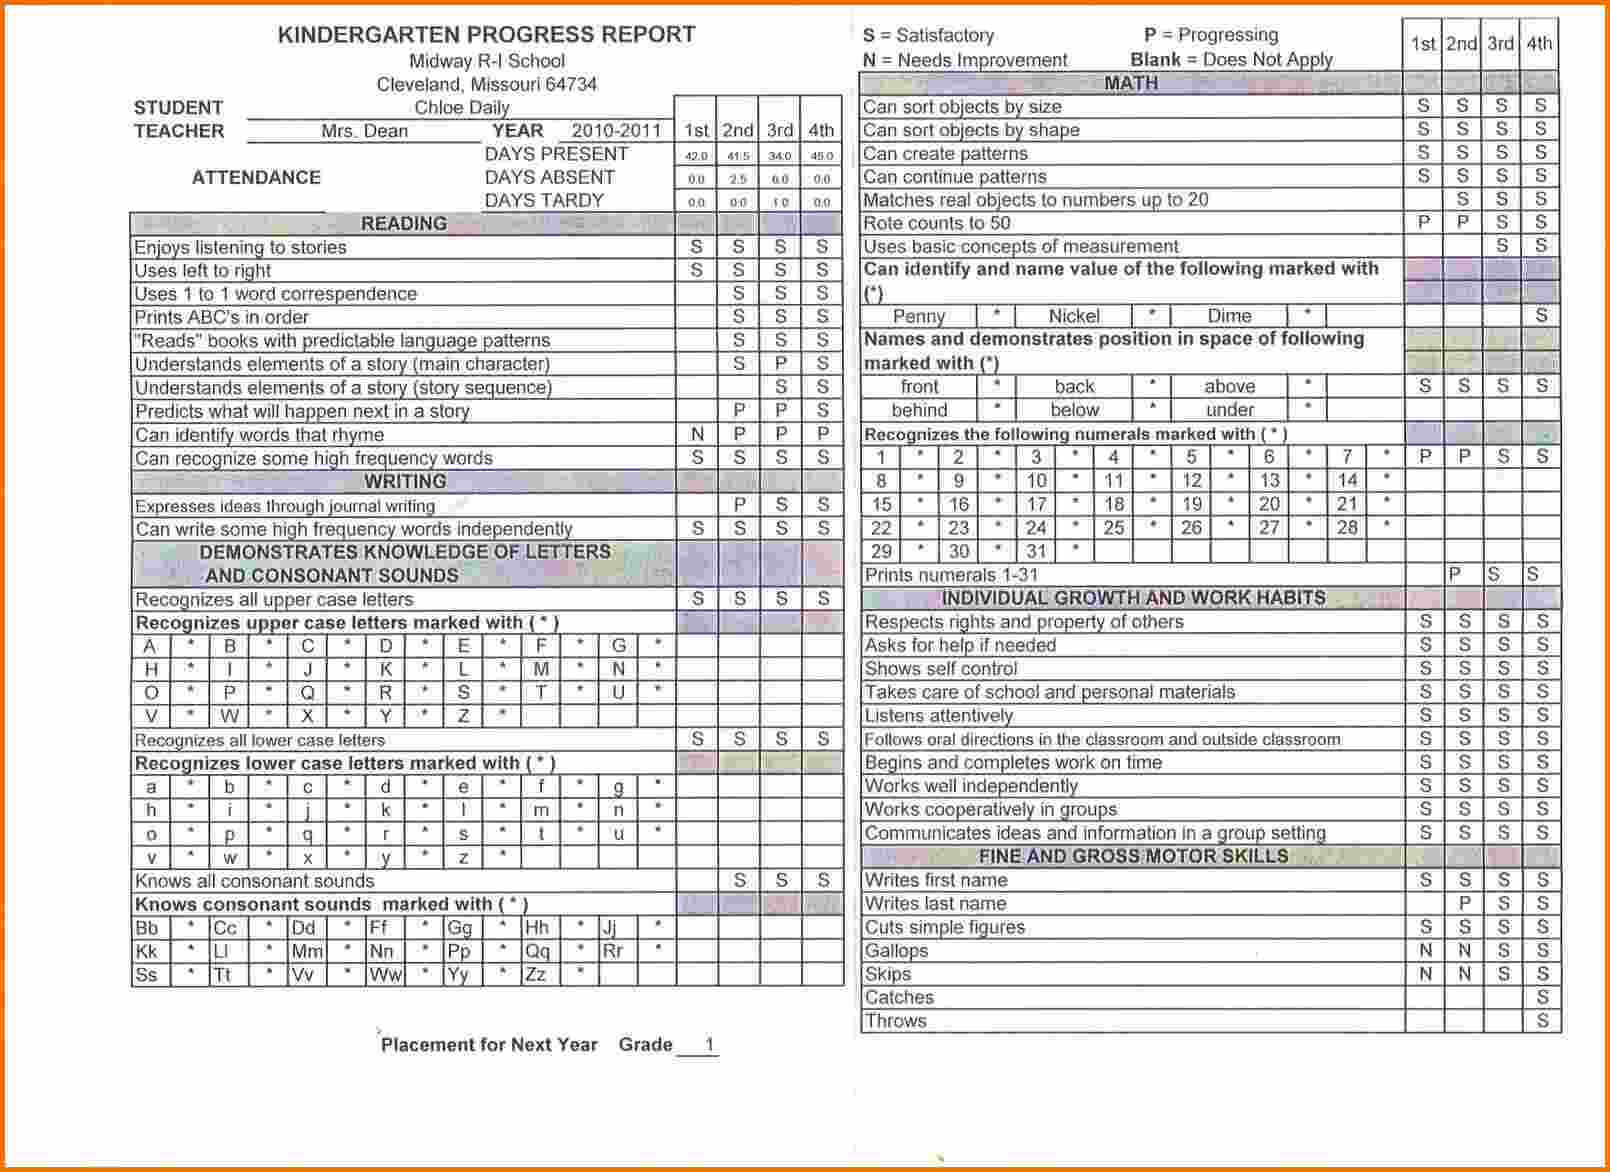 021 Result Card Template Simple Kindergarten Report Awful With Result Card Template